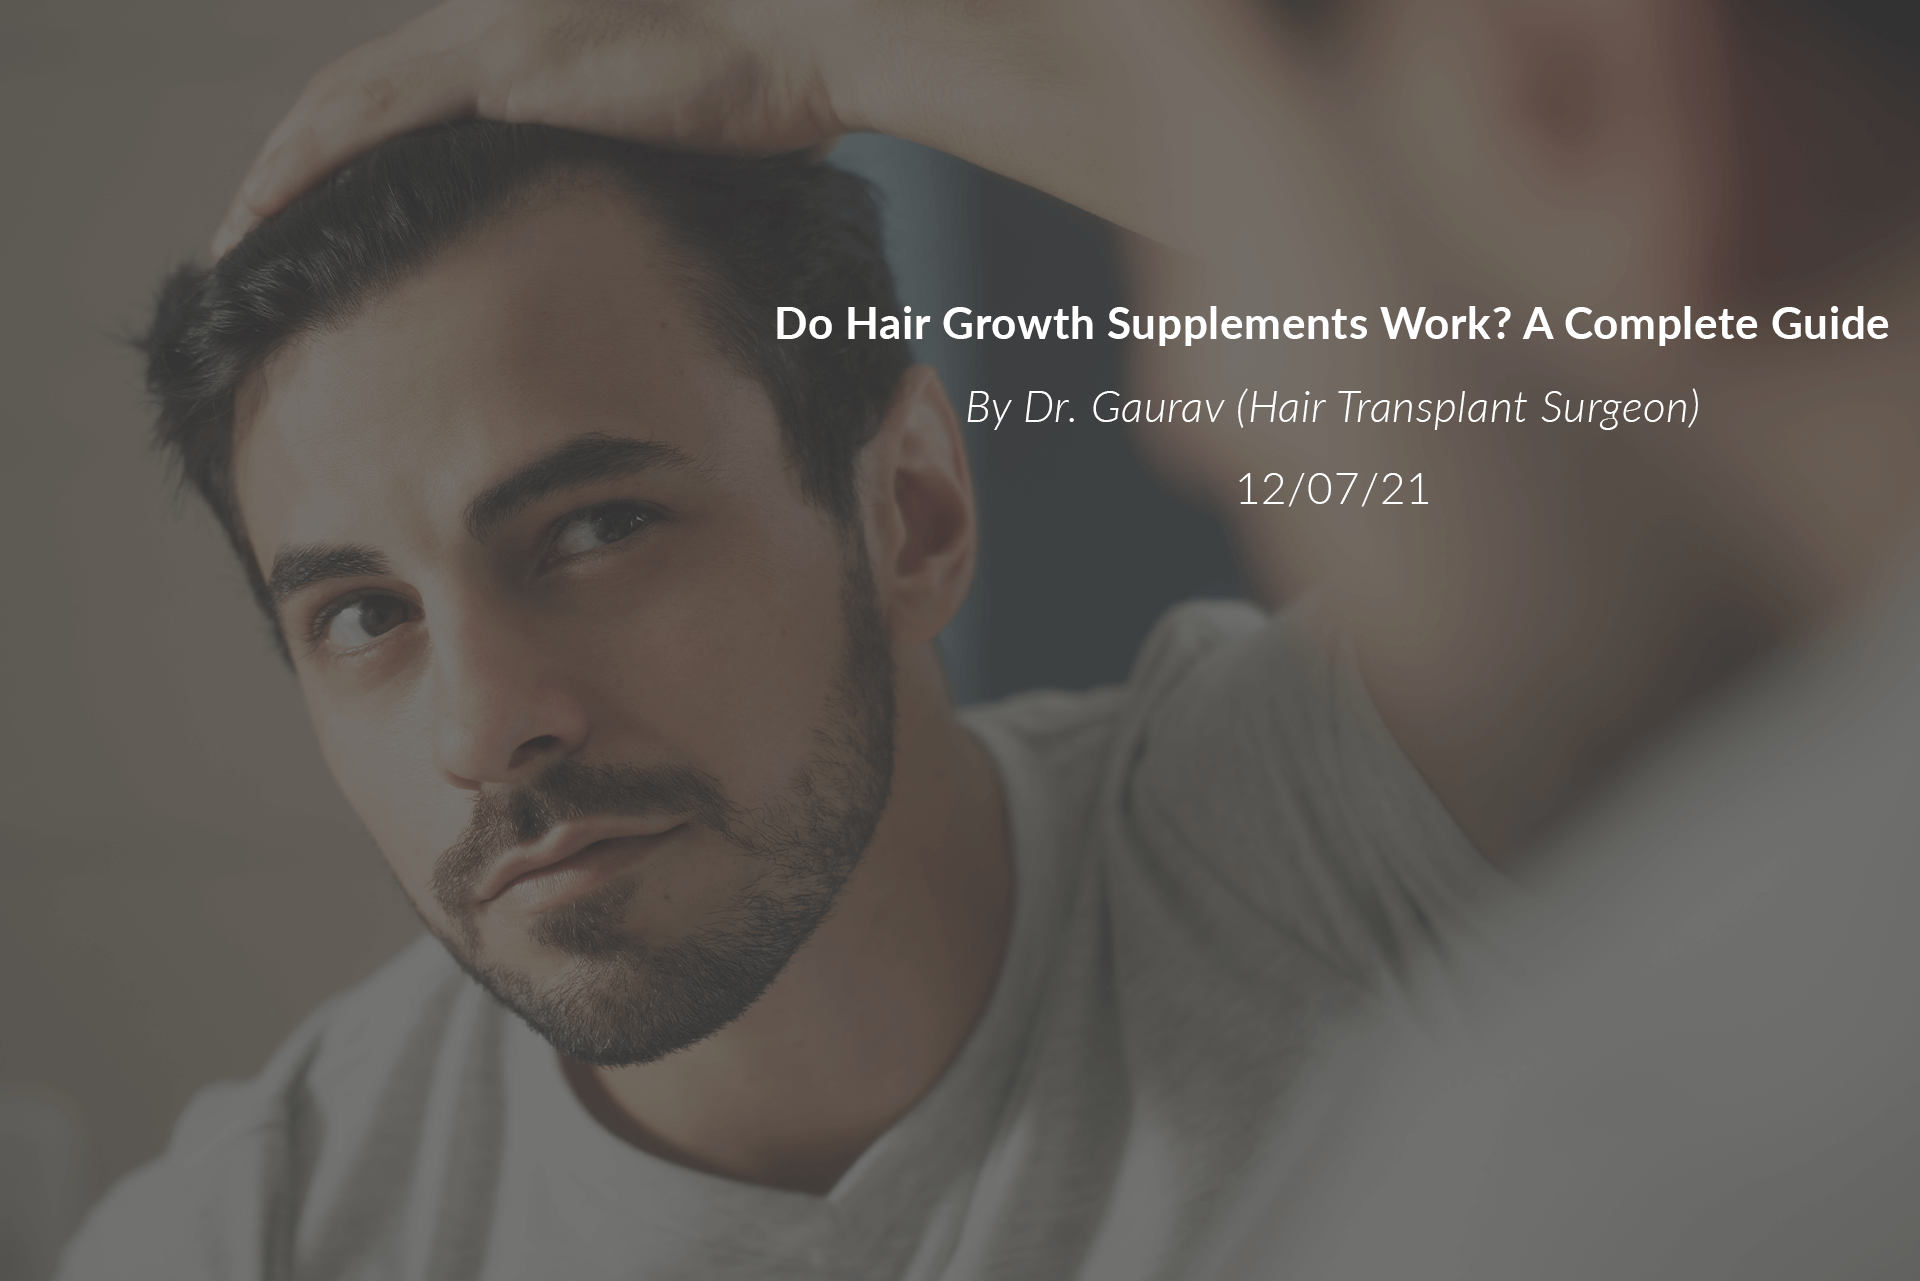 Do Hair Growth Supplements Work? A Complete Guide